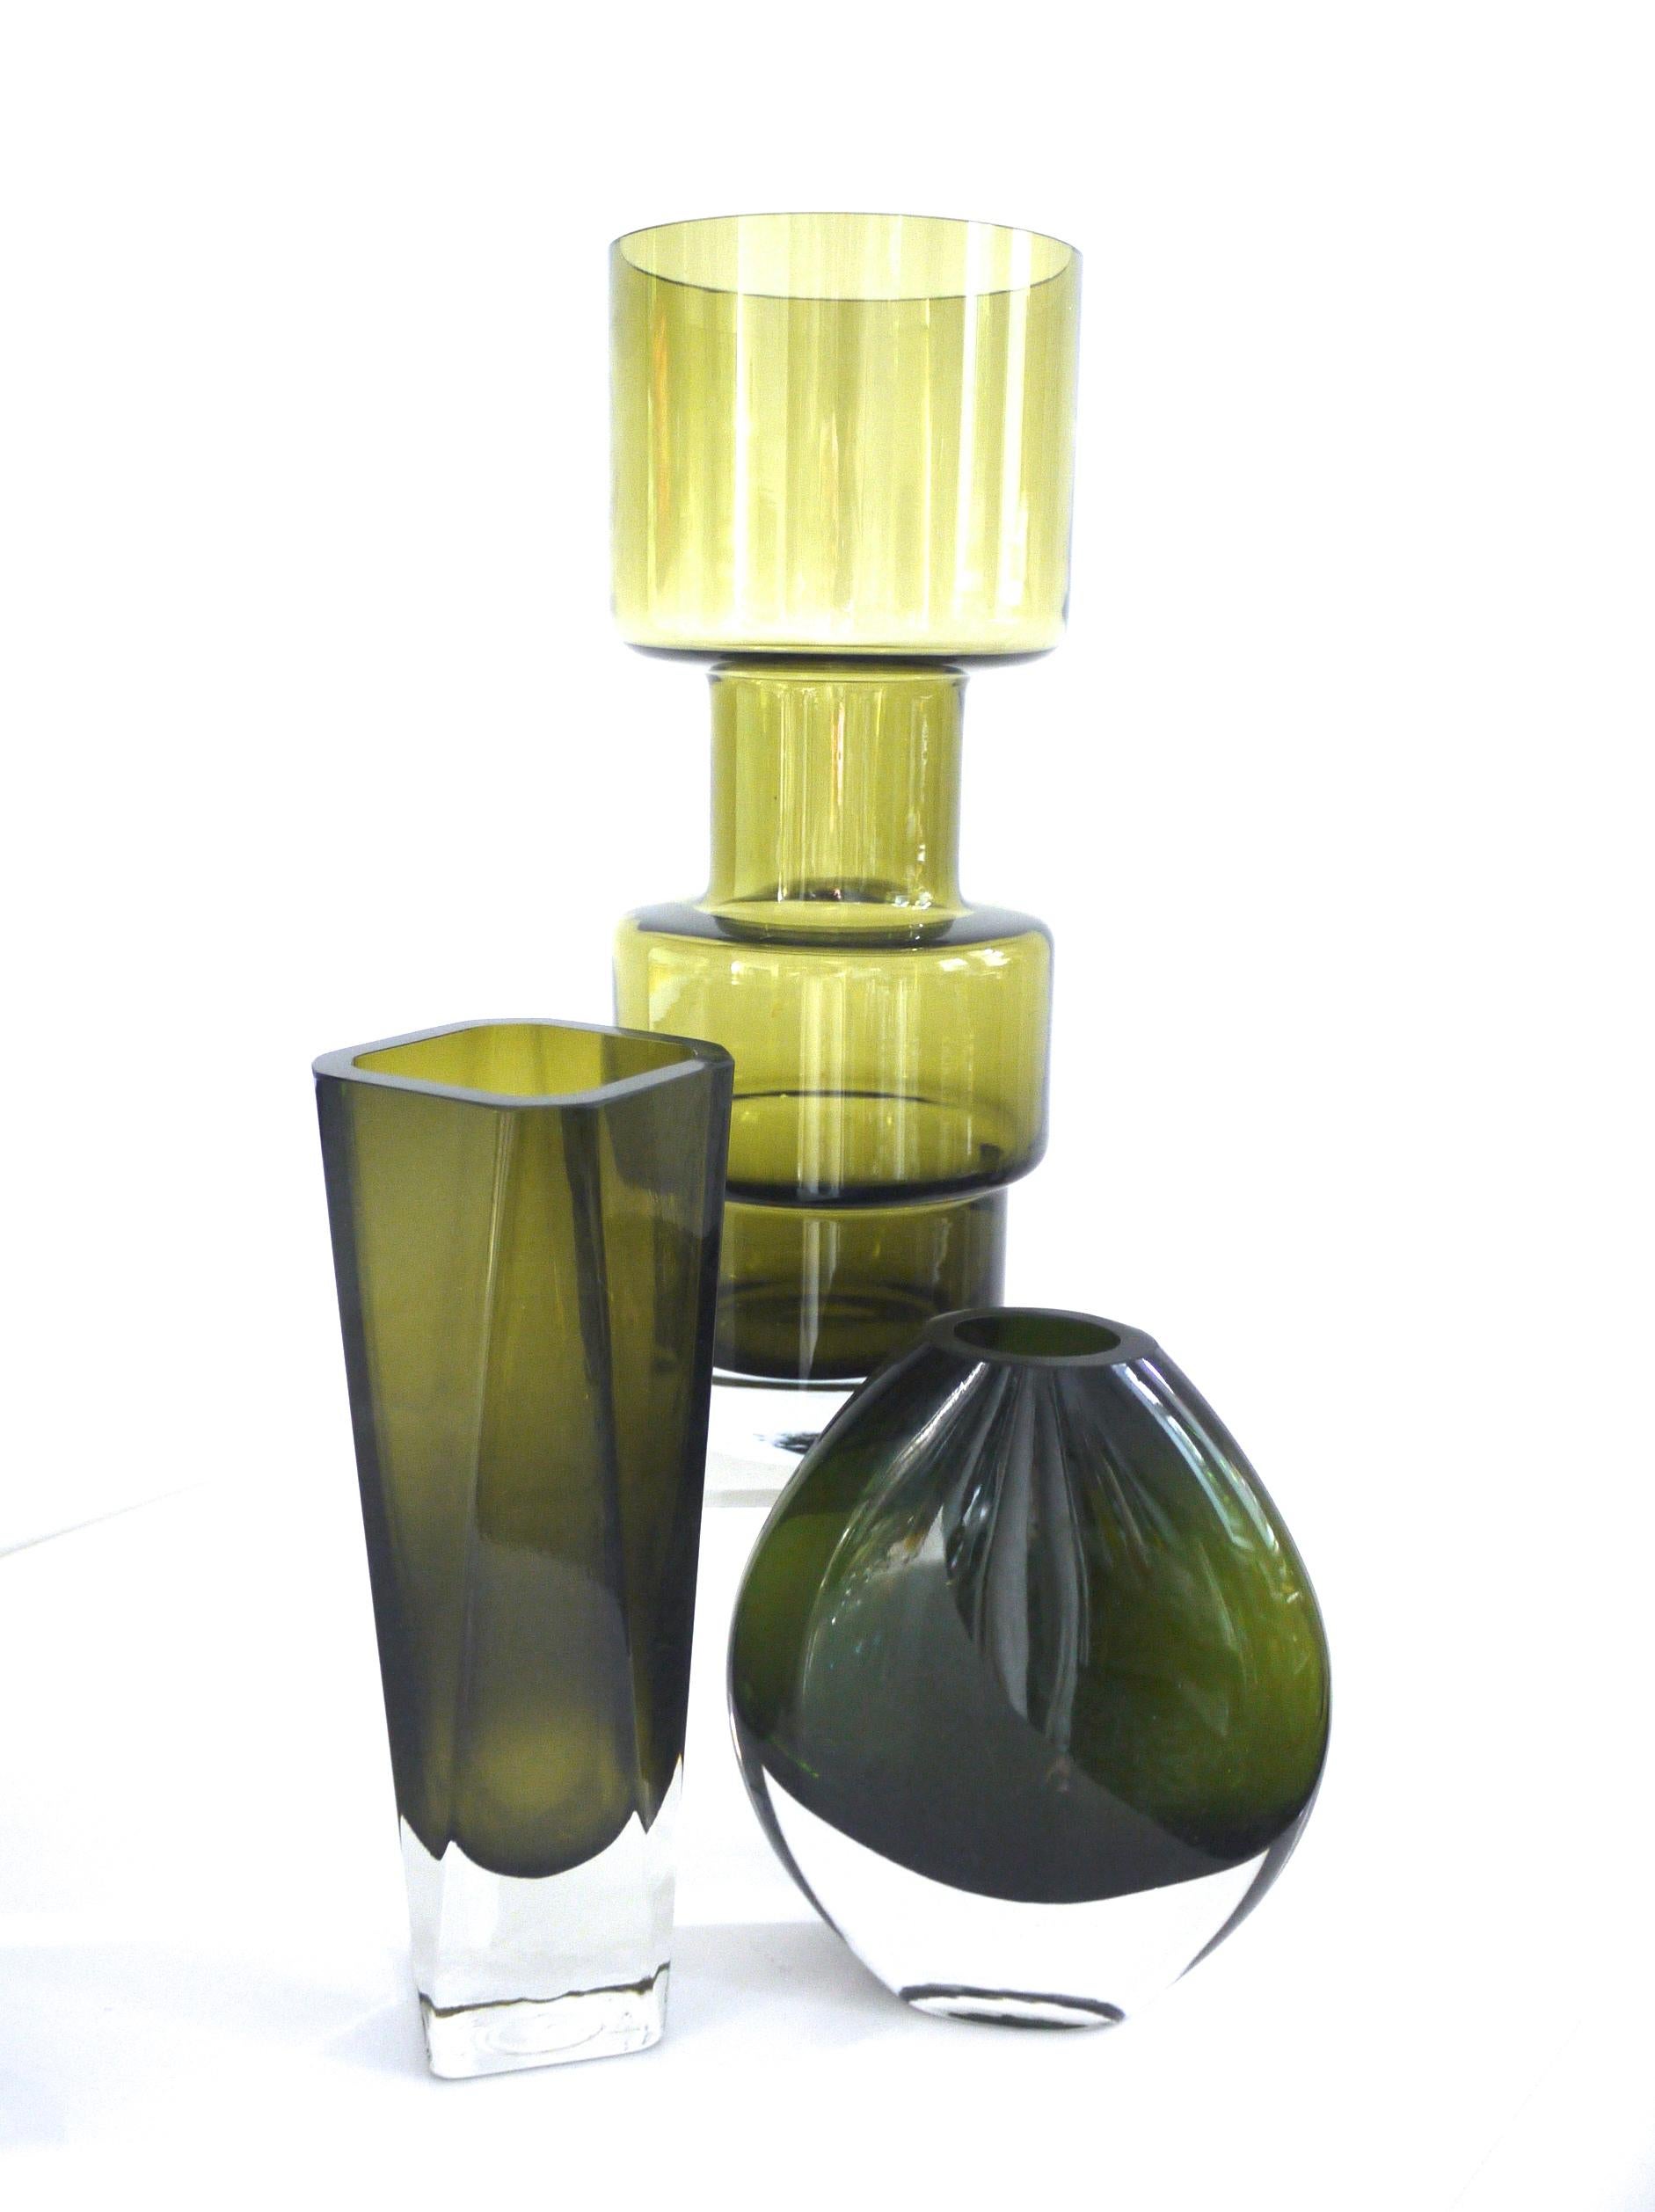 Mid-20th Century Collection Riihimaki, Nason and Viking Glass, Mid-1950s Vases 2 and Dish For Sale